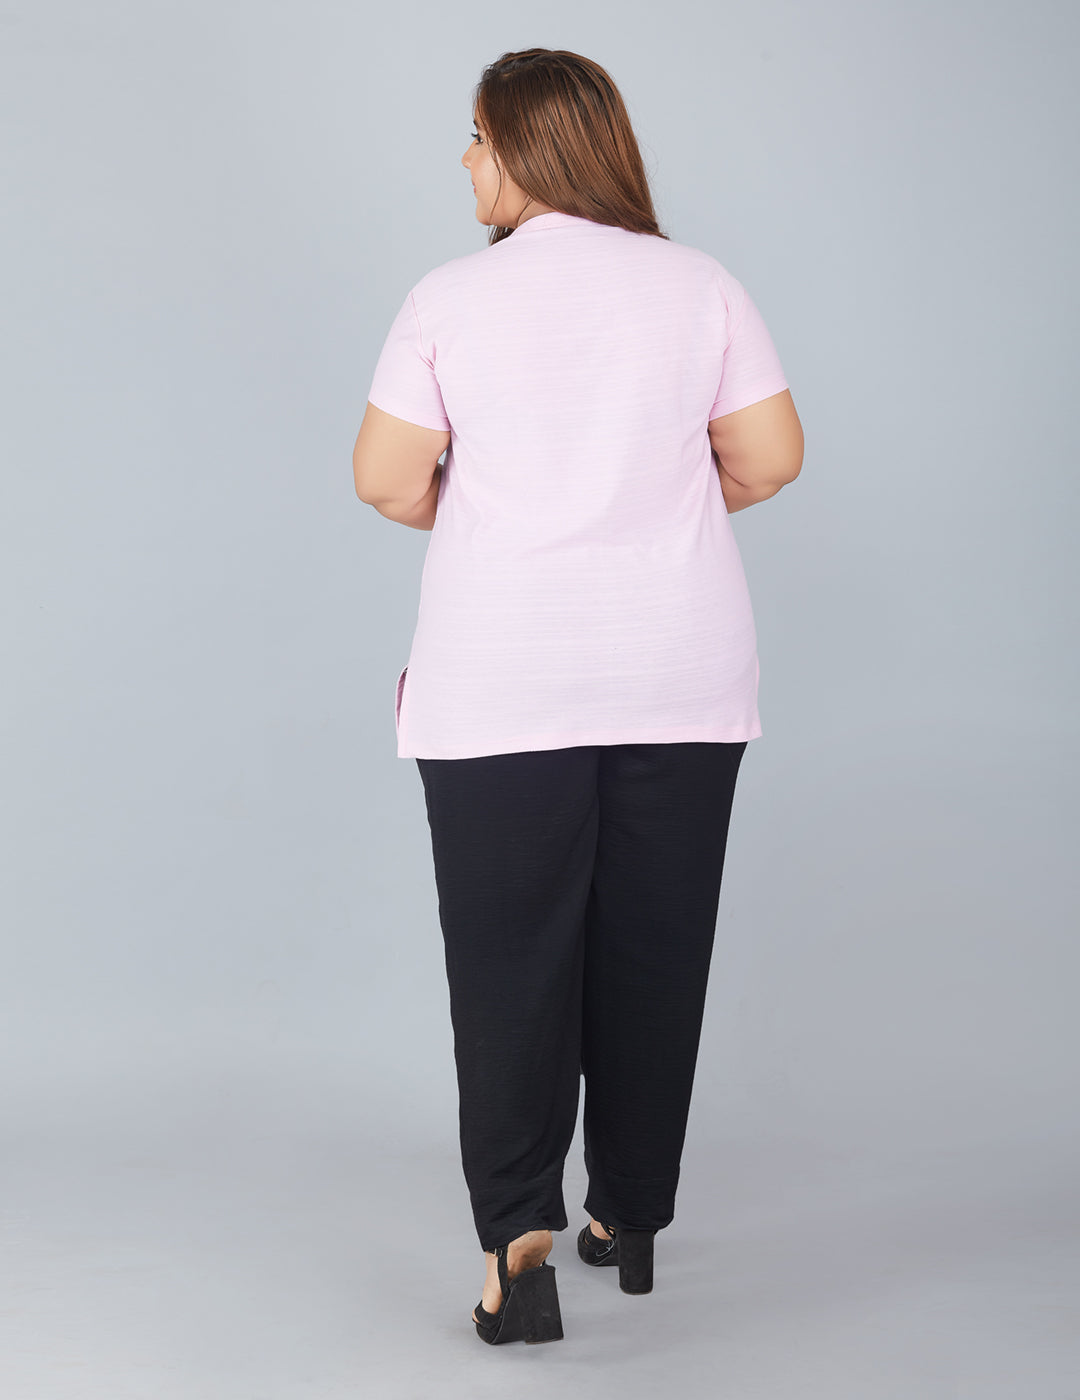 comfortable Plus Size Cotton T-shirts For Women In Summer - Blush Pink